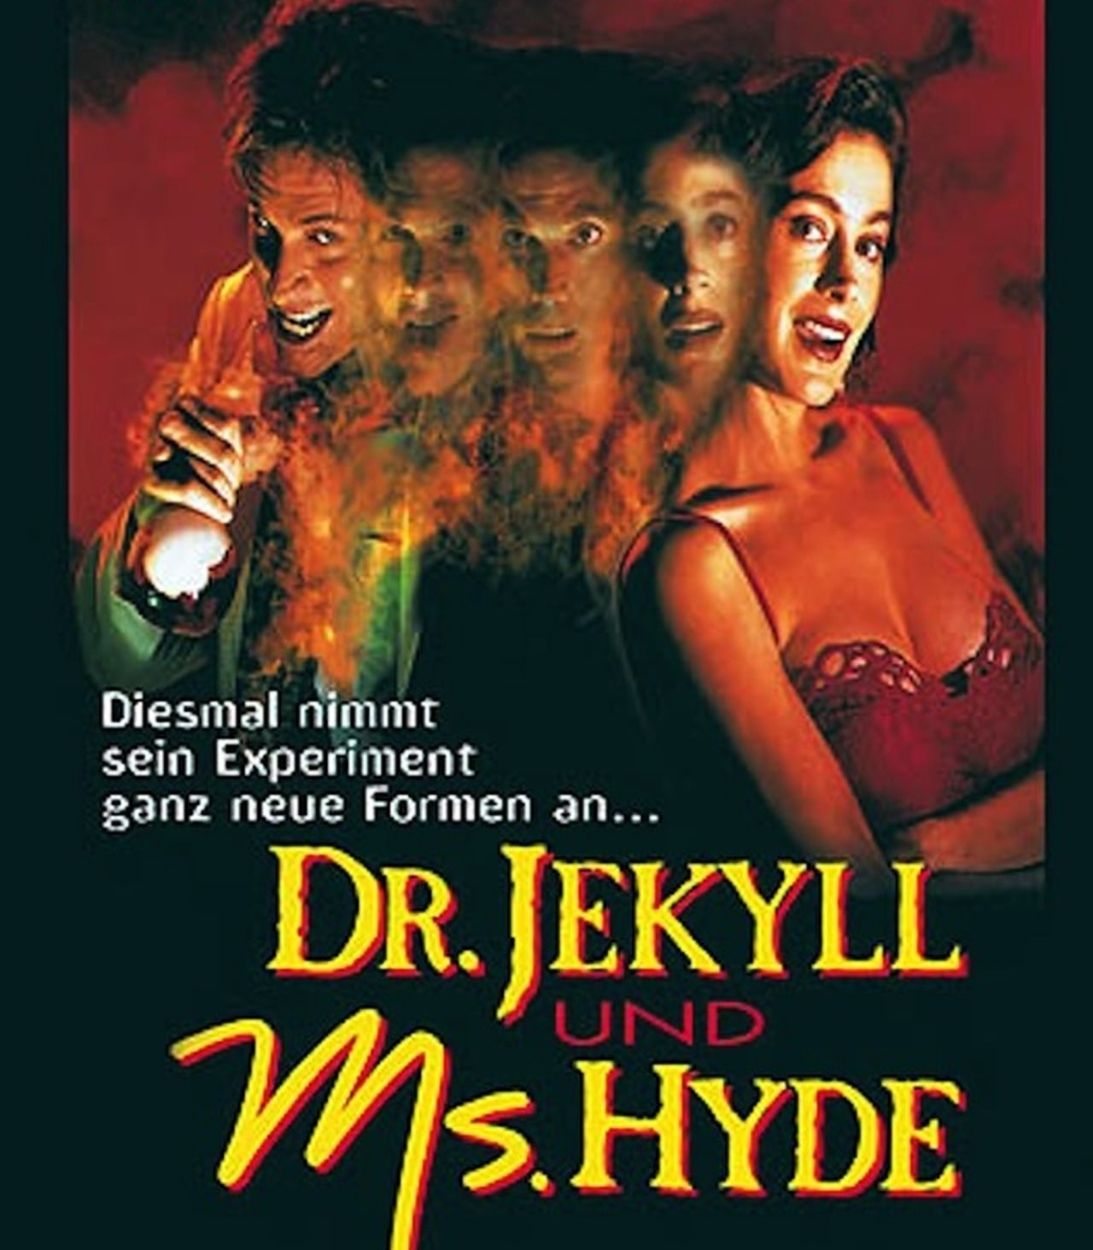 dr jekyll and ms hyde poster TLDR vertical